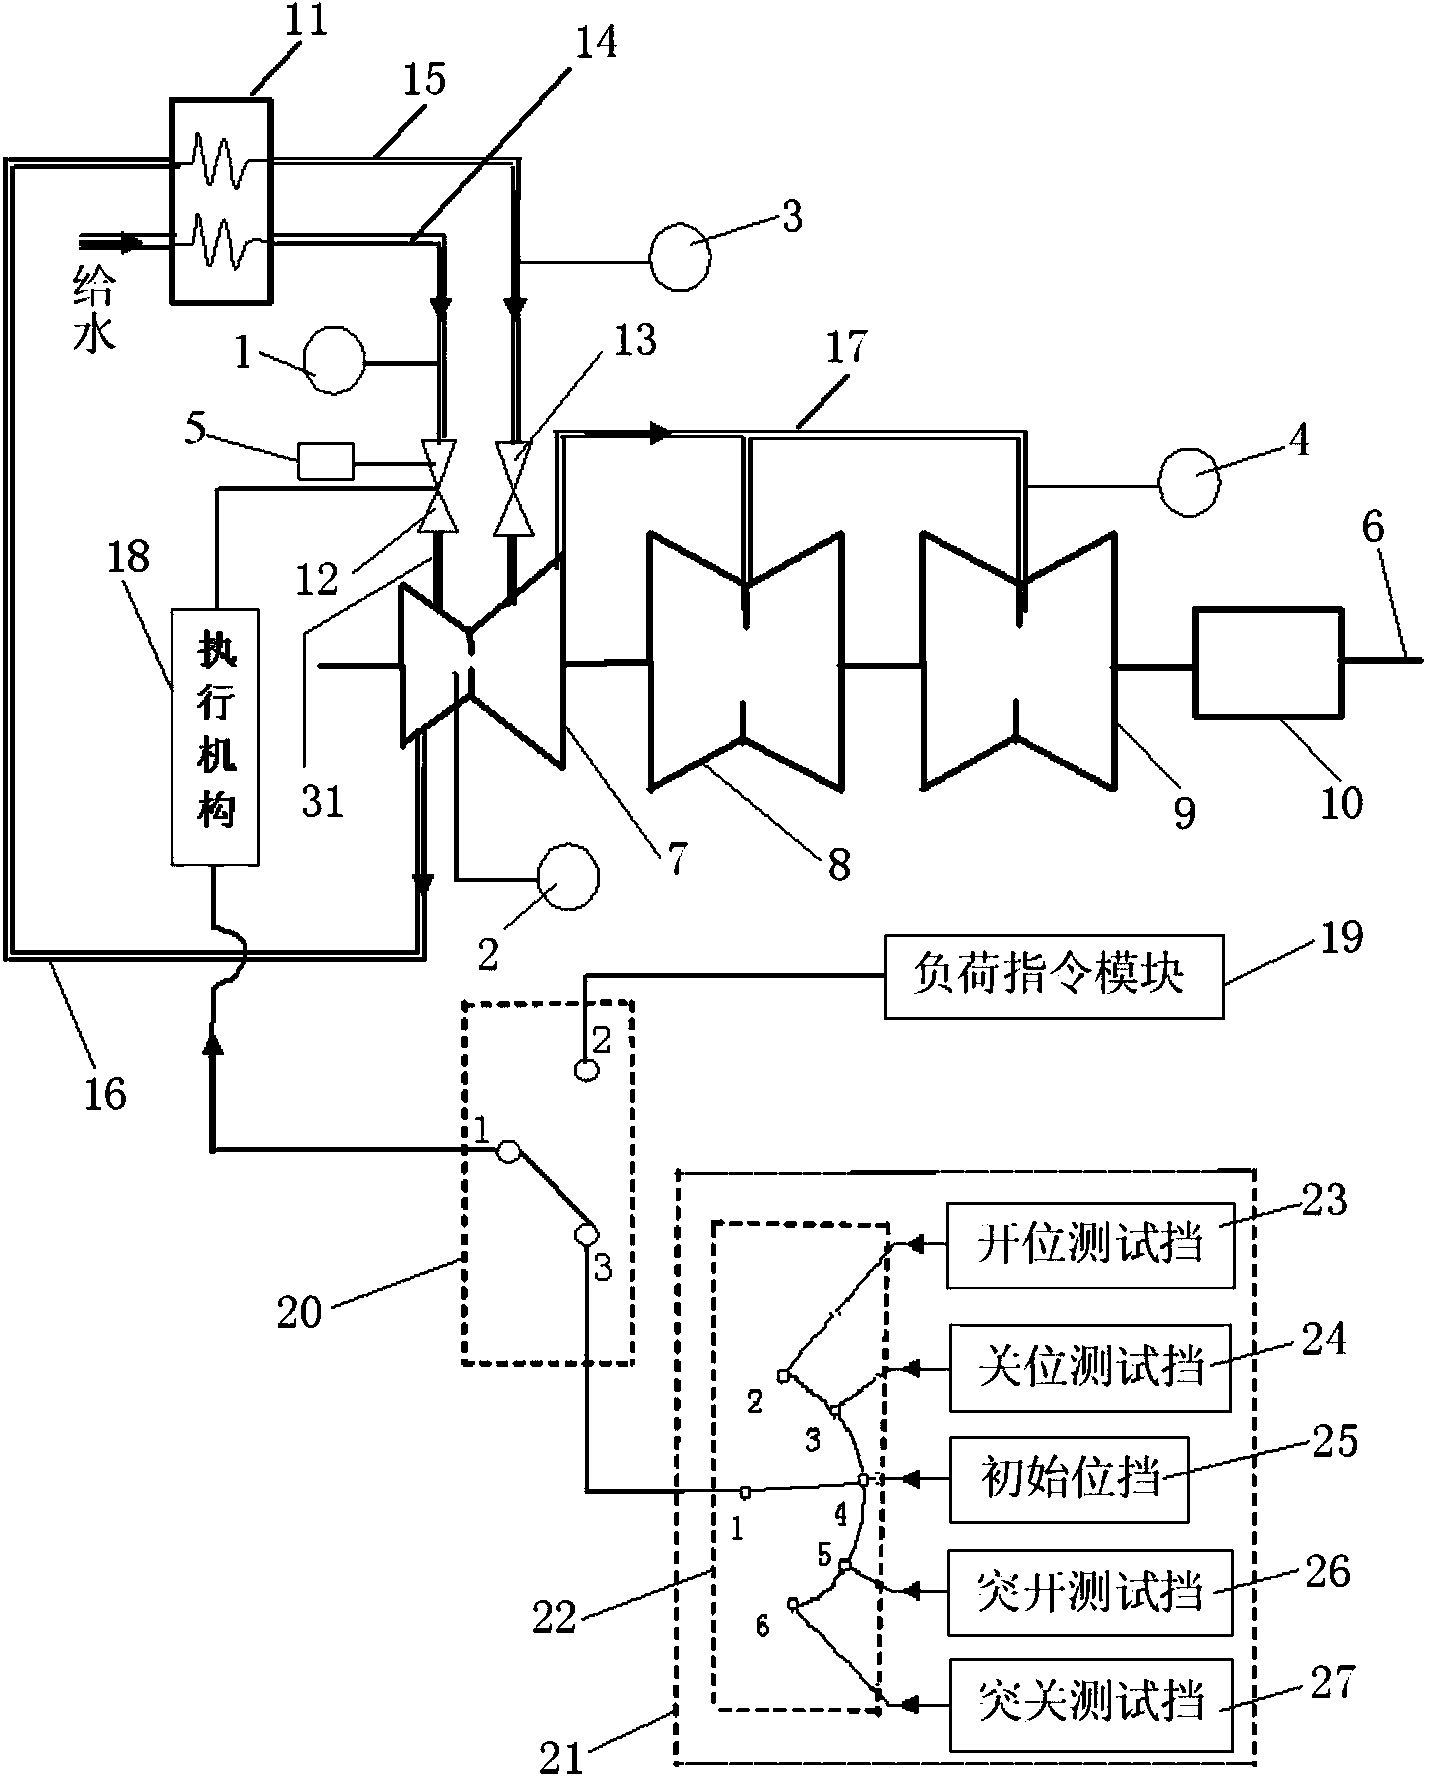 System and method for testing large steam turbine volume time constant